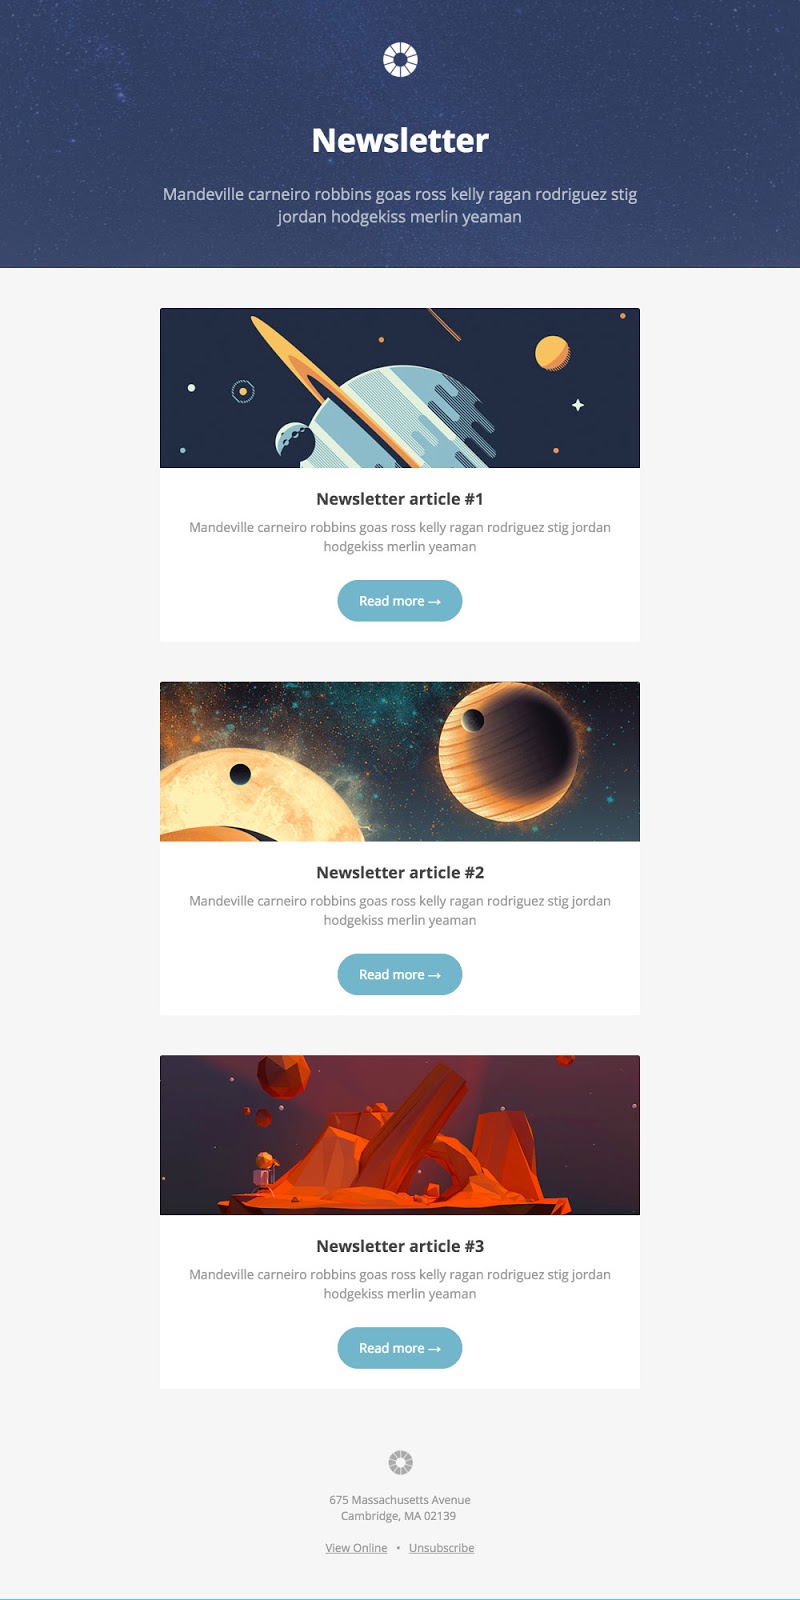 Litmus has a huge collection of free newsletter templates. This theme, named “Pook” is sleek, modern, and fun